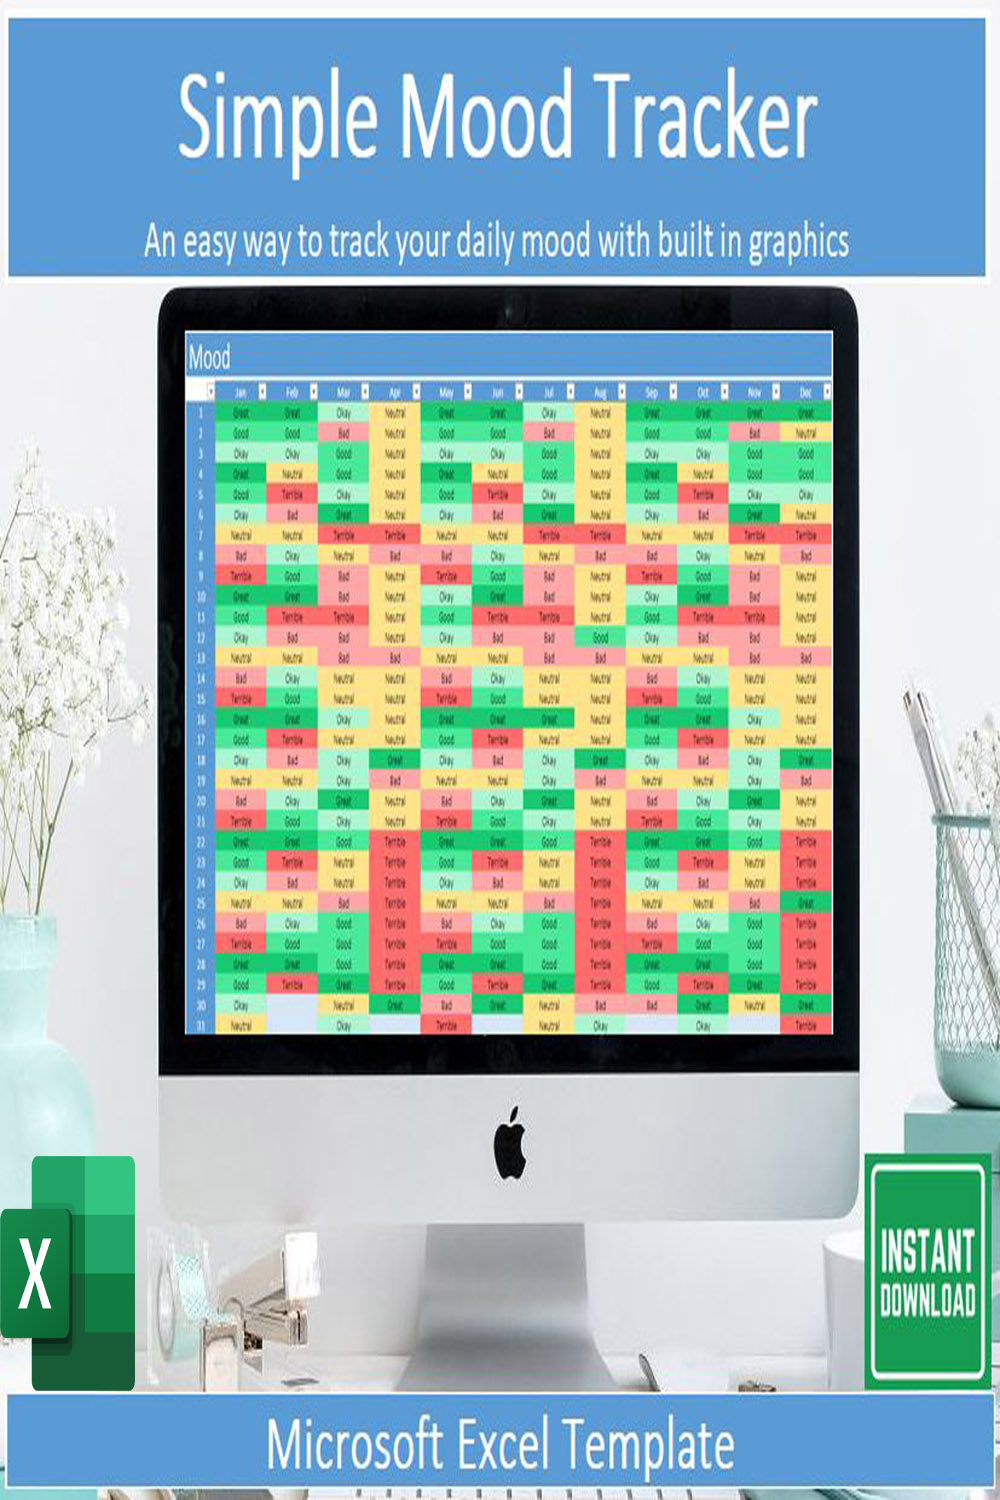 Simple Mood Tracker Template Tool for Microsoft Excel pinterest image.